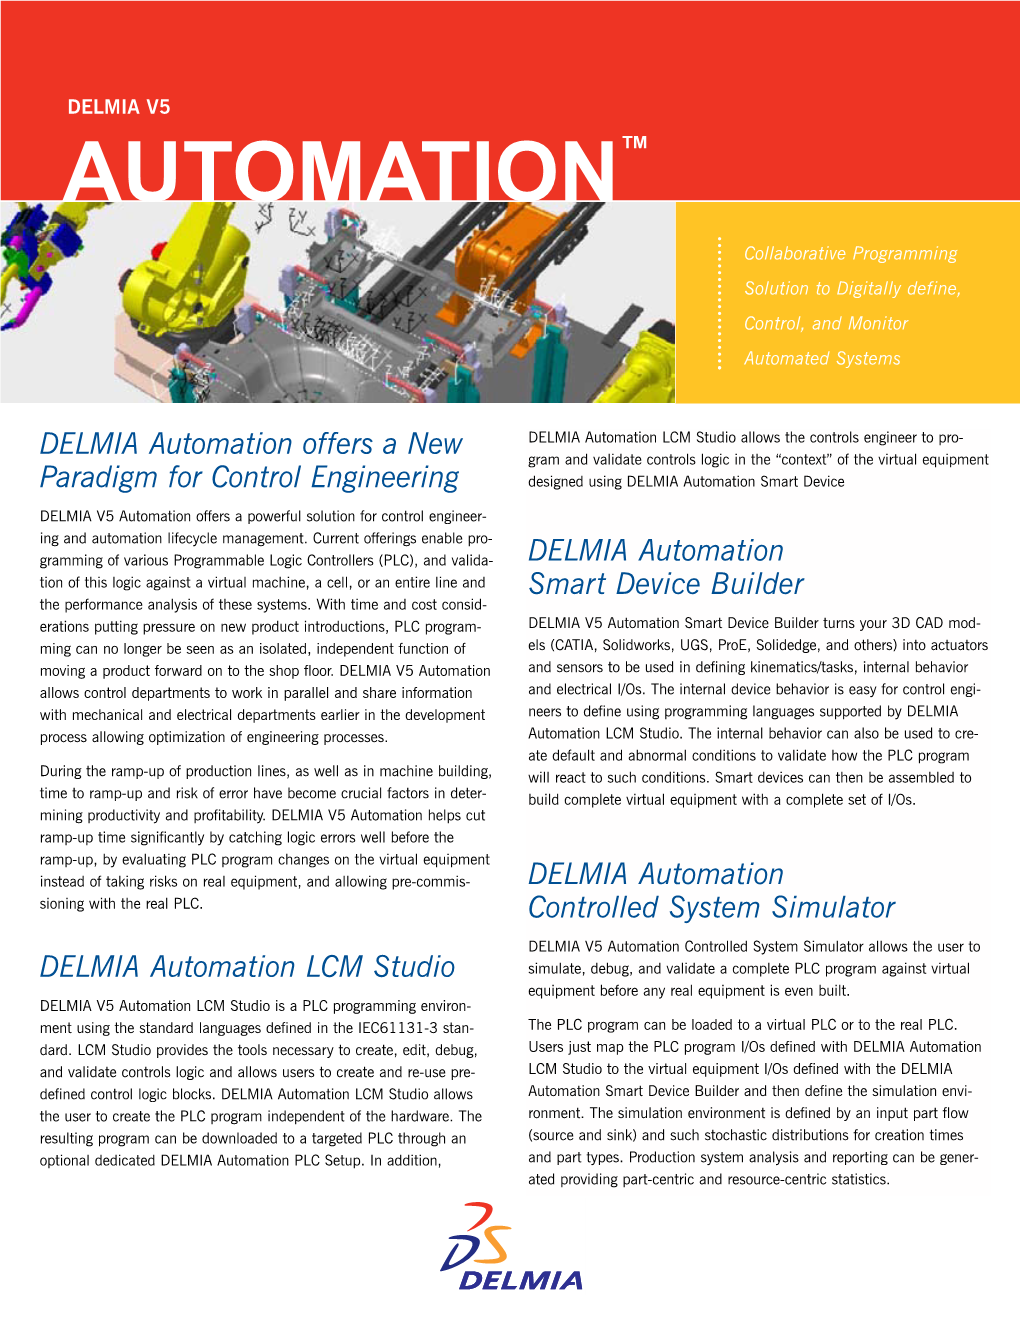 AUTOMATION™ Collaborative Programming Solution to Digitally Define, Control, and Monitor Automated Systems